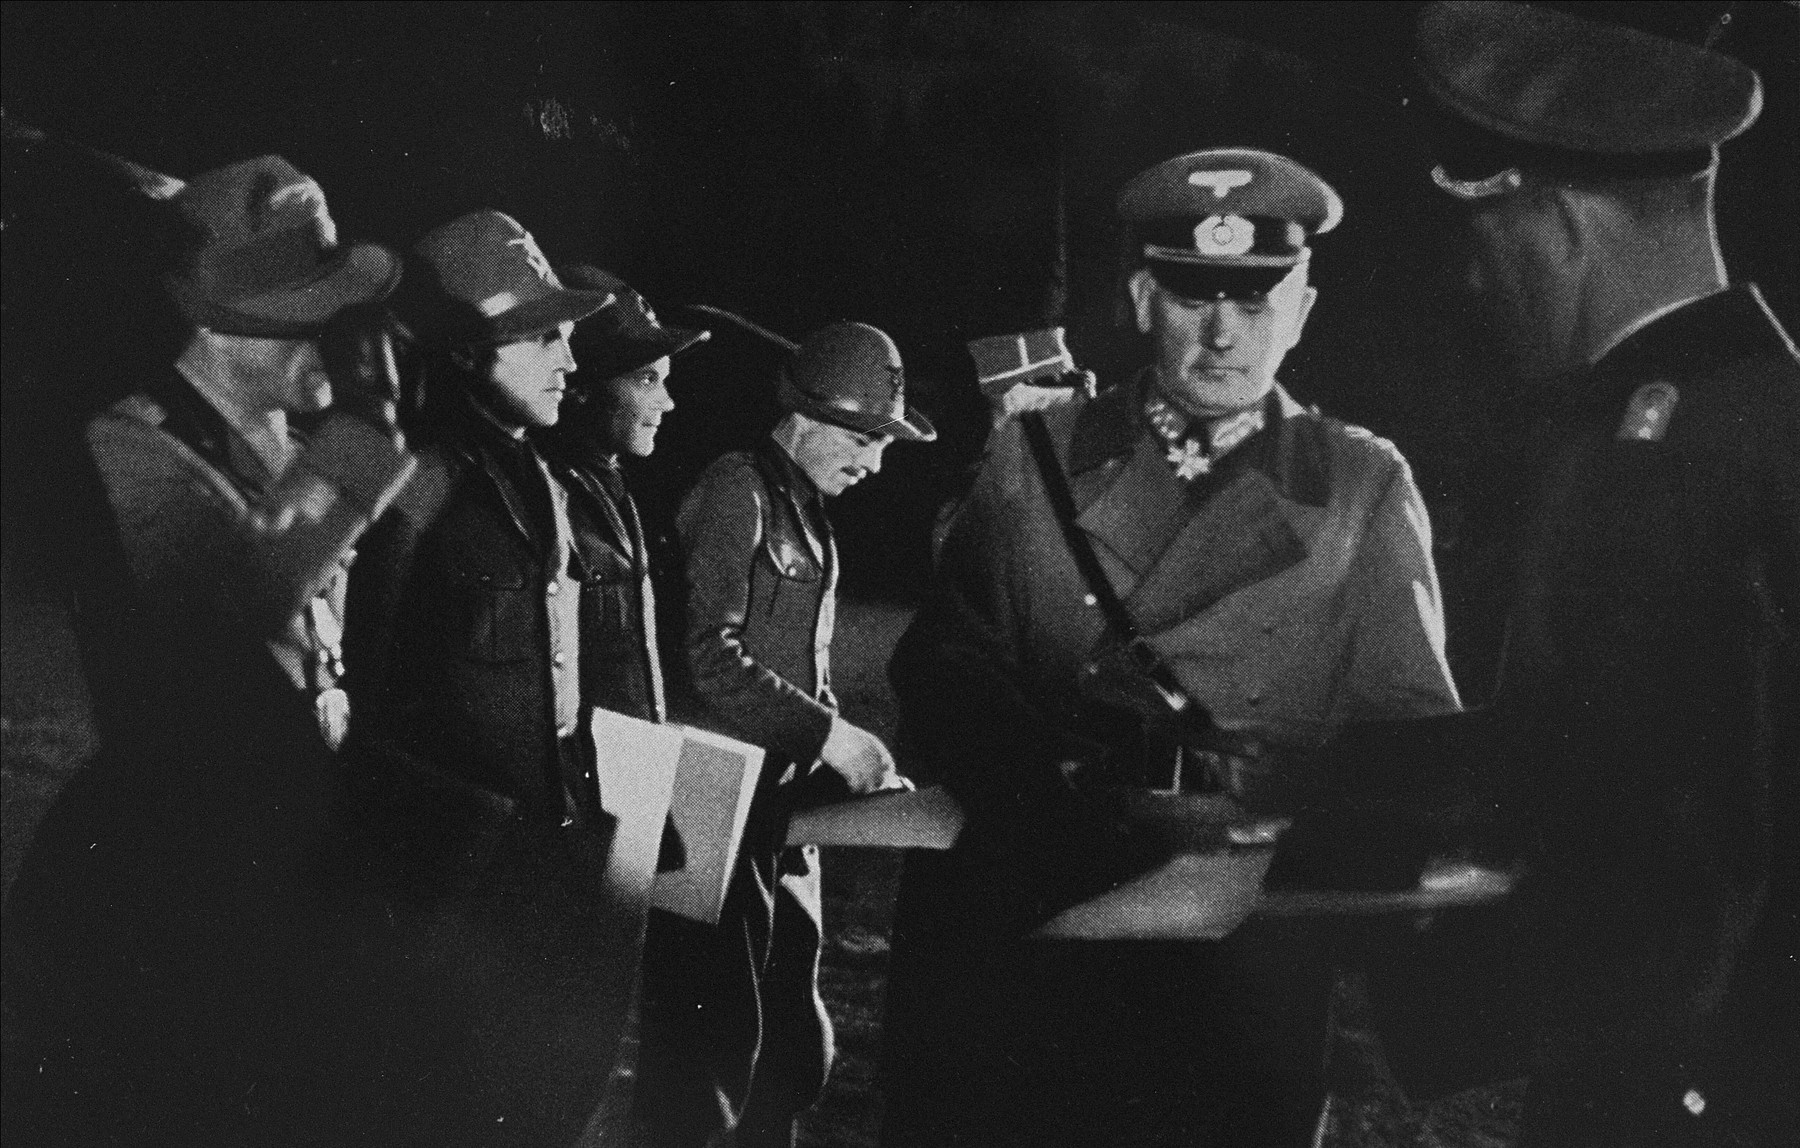 General Werner von Blomberg distributes winners' certificates to an Italian military patrol.  

These certificates were awarded to competitors who participated in exhibition sports during the 1936 Winter Olympics.